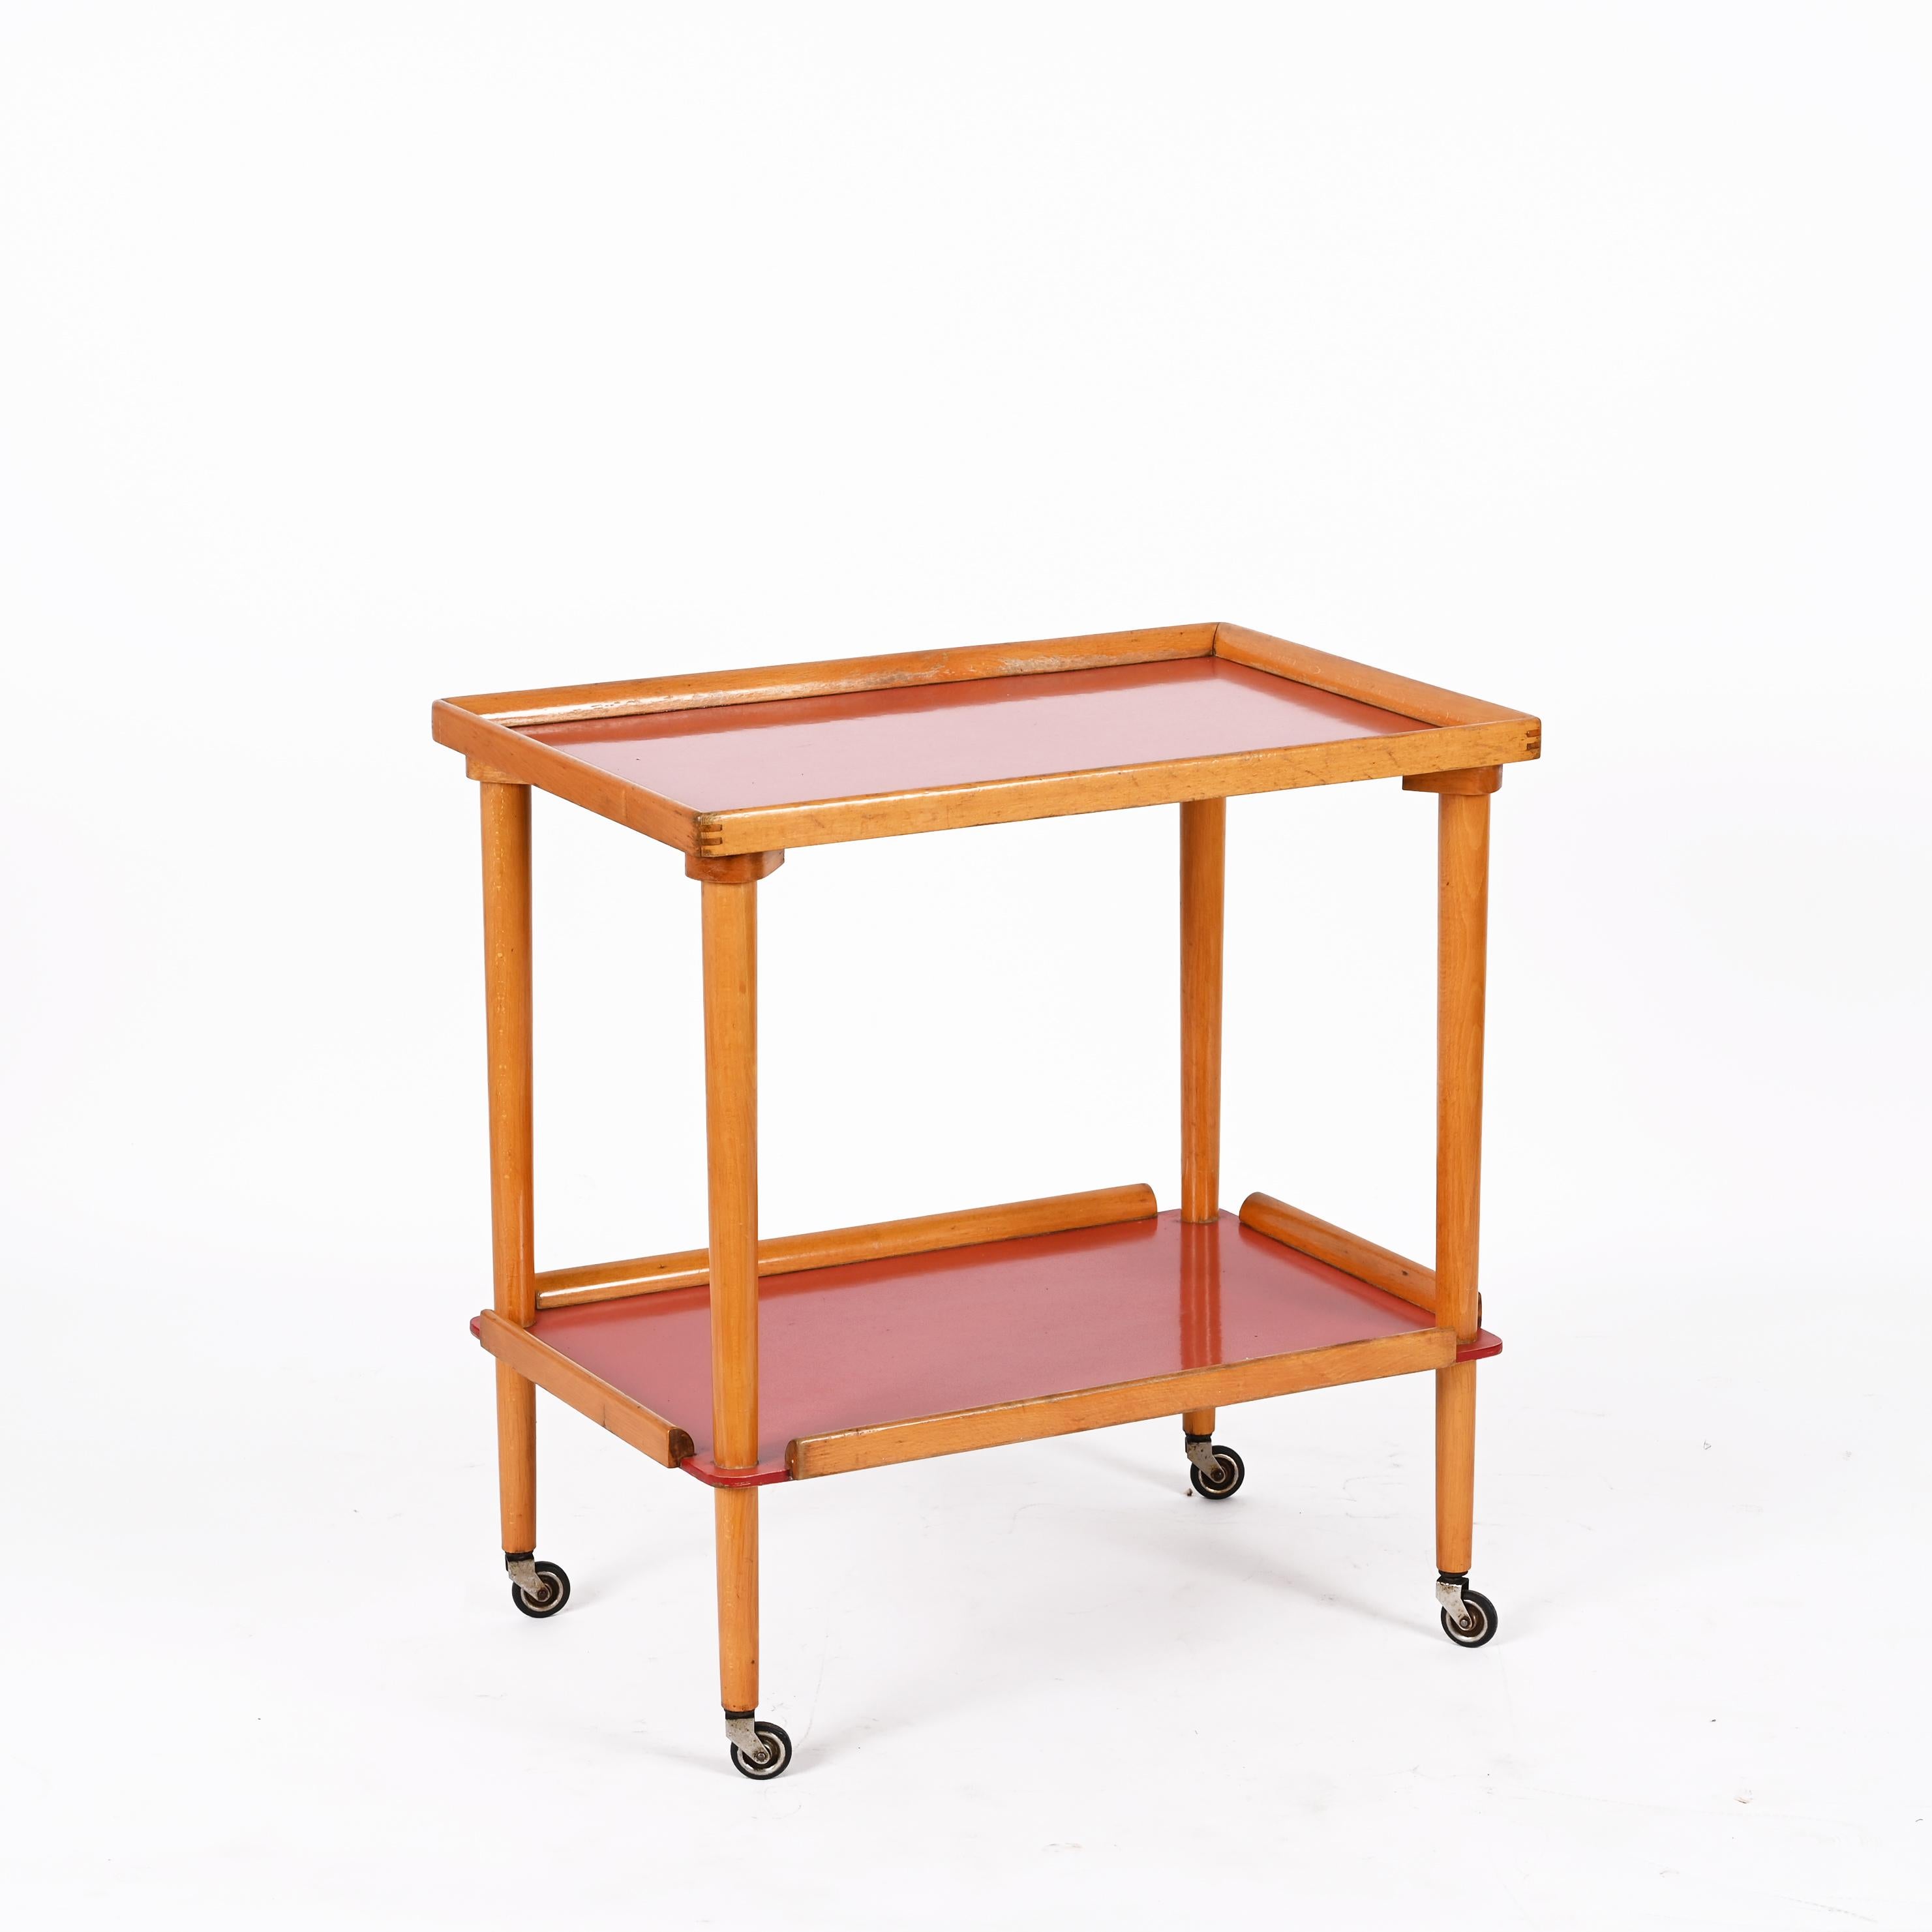 Midcentury Italian Beech Wood and Formica Red Two Tiered Bar Cart, 1960s For Sale 1